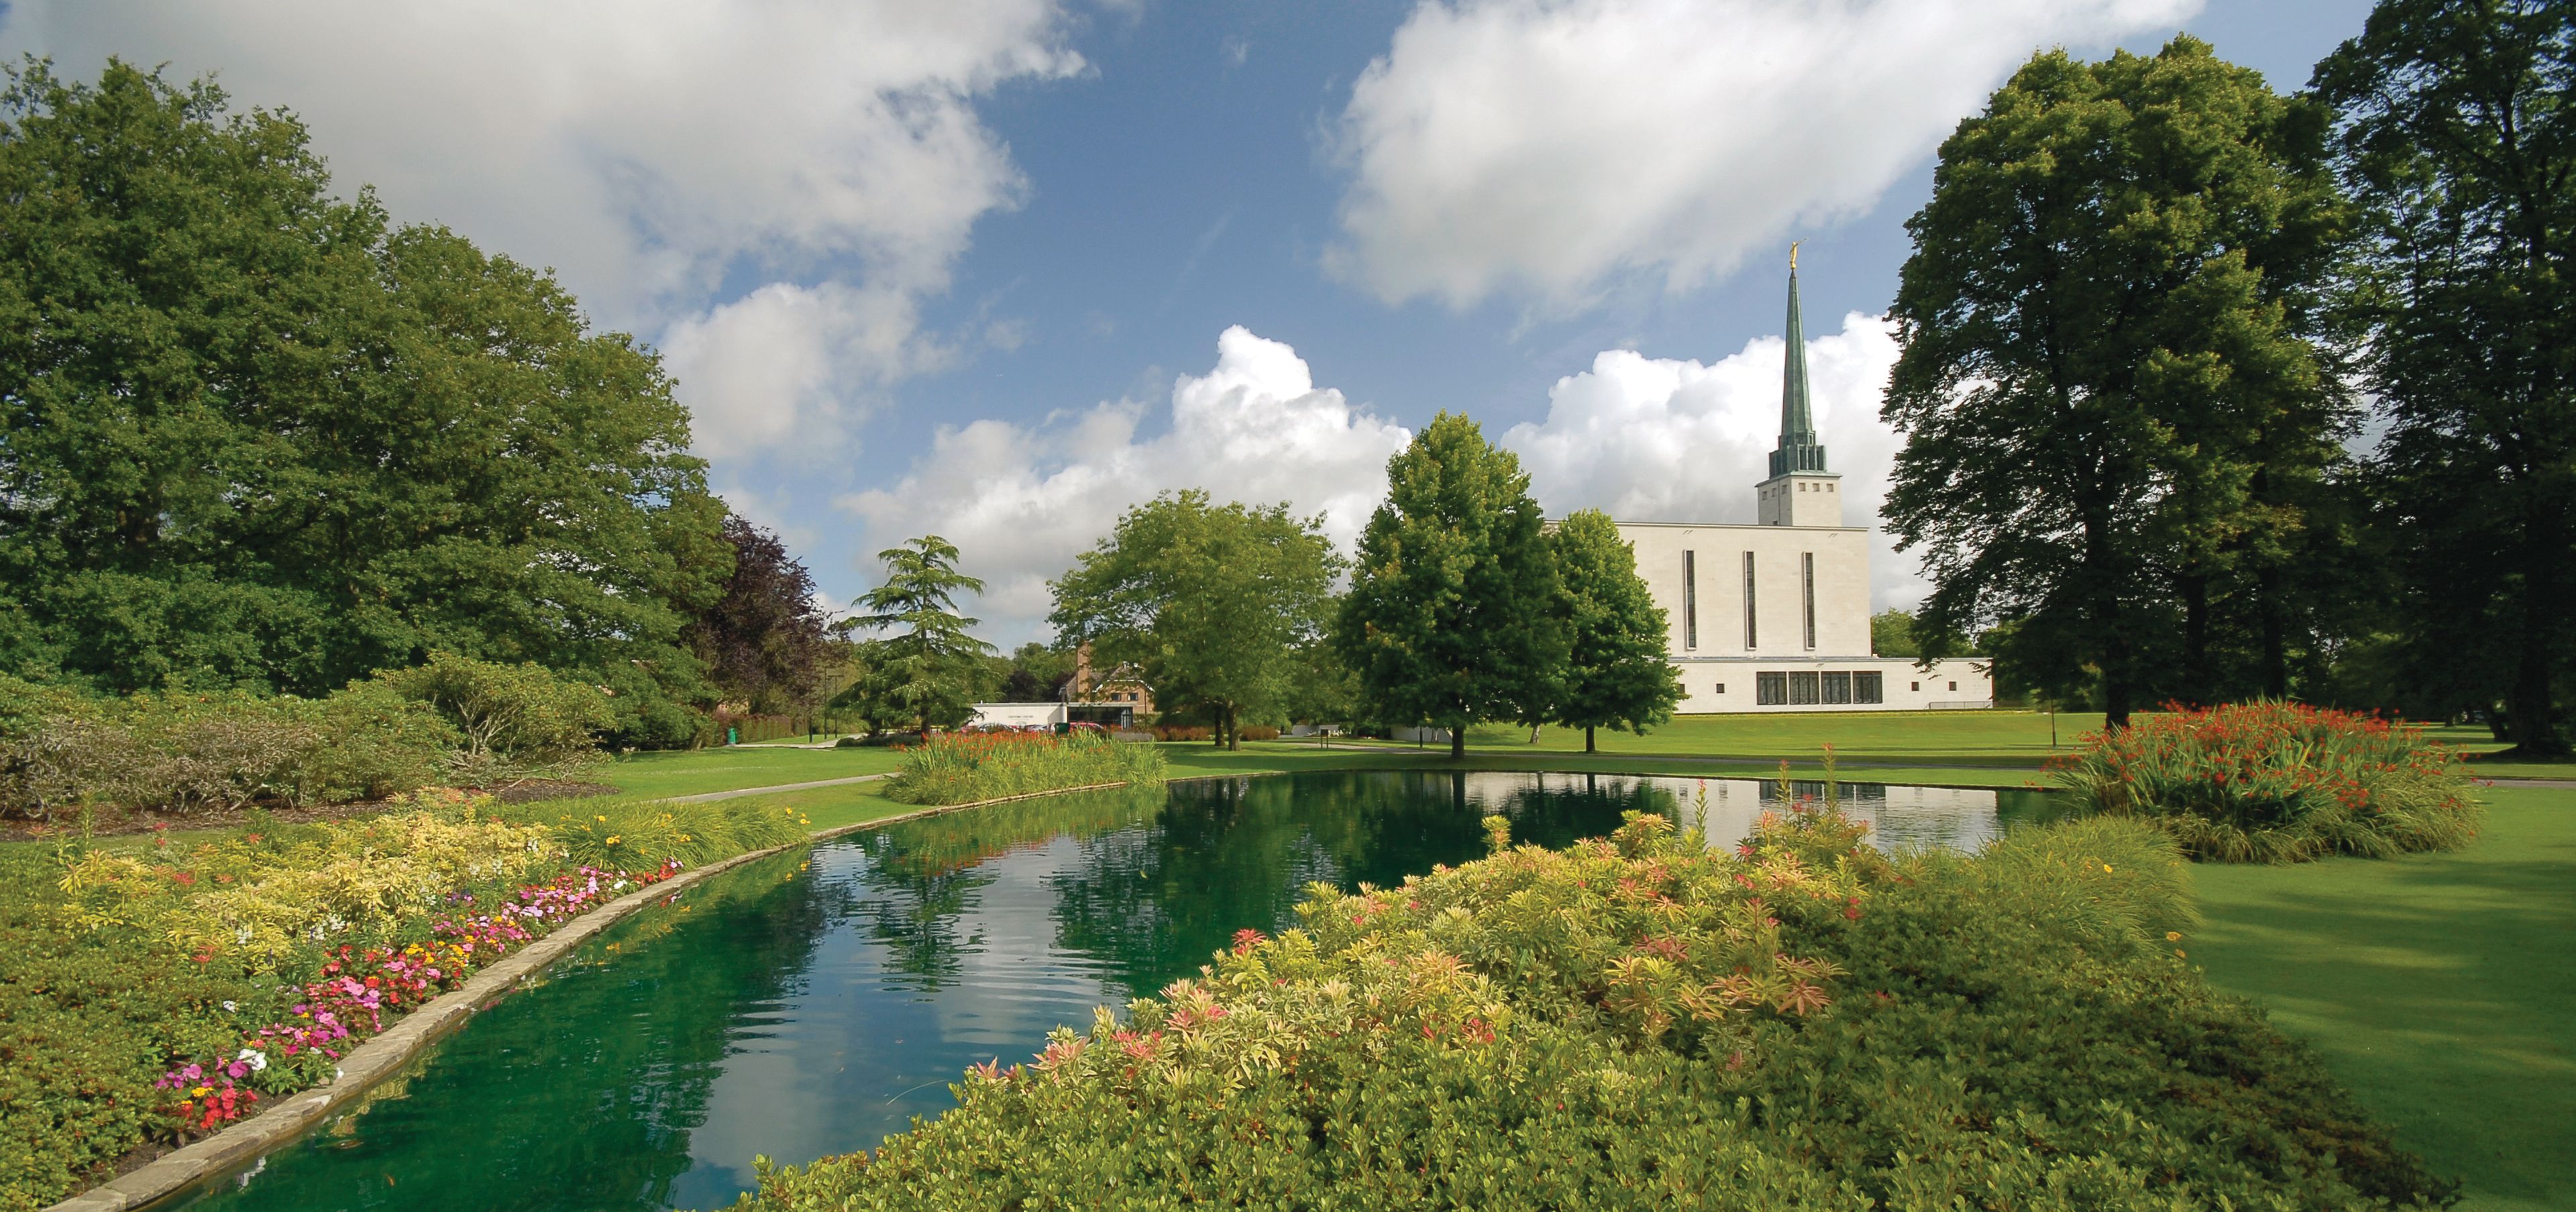 The London England Temple pond, including scenery and the exterior of the temple.